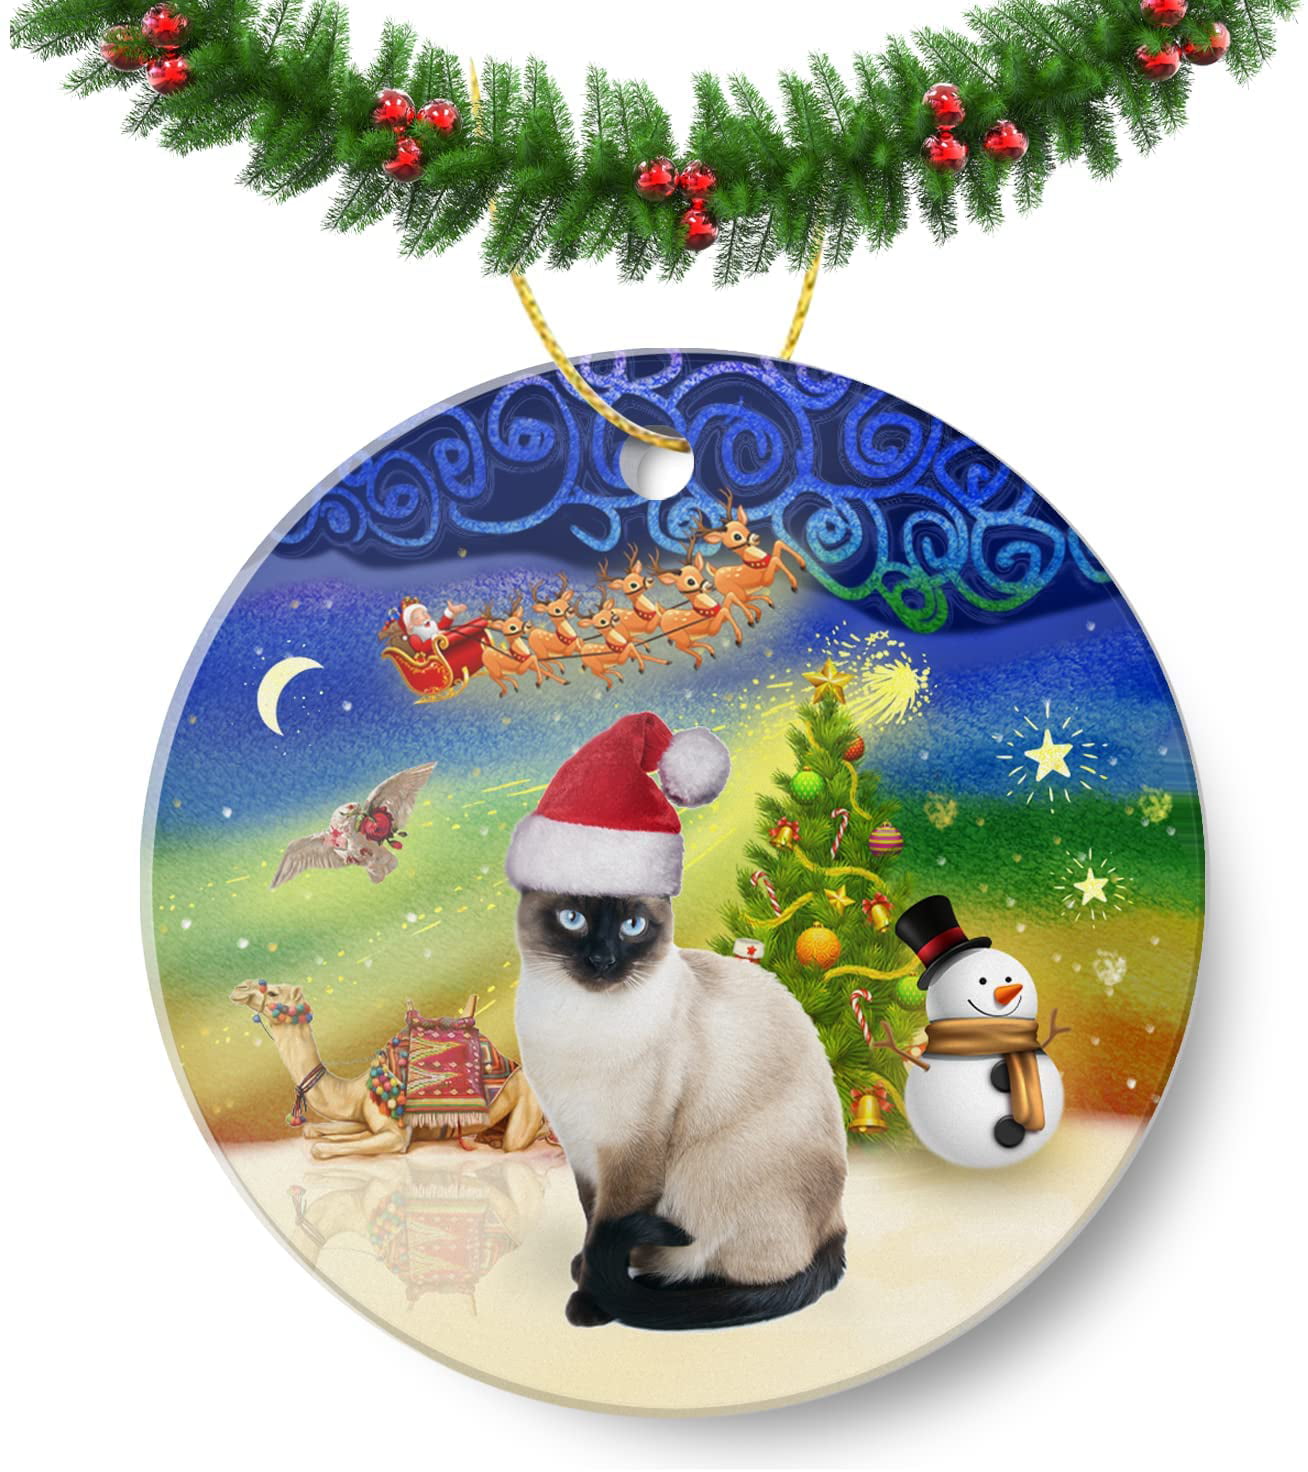 SIAMESE CAT CHRISTMAS ORNAMENT HOLIDAY Figurine kitten gift scarf 